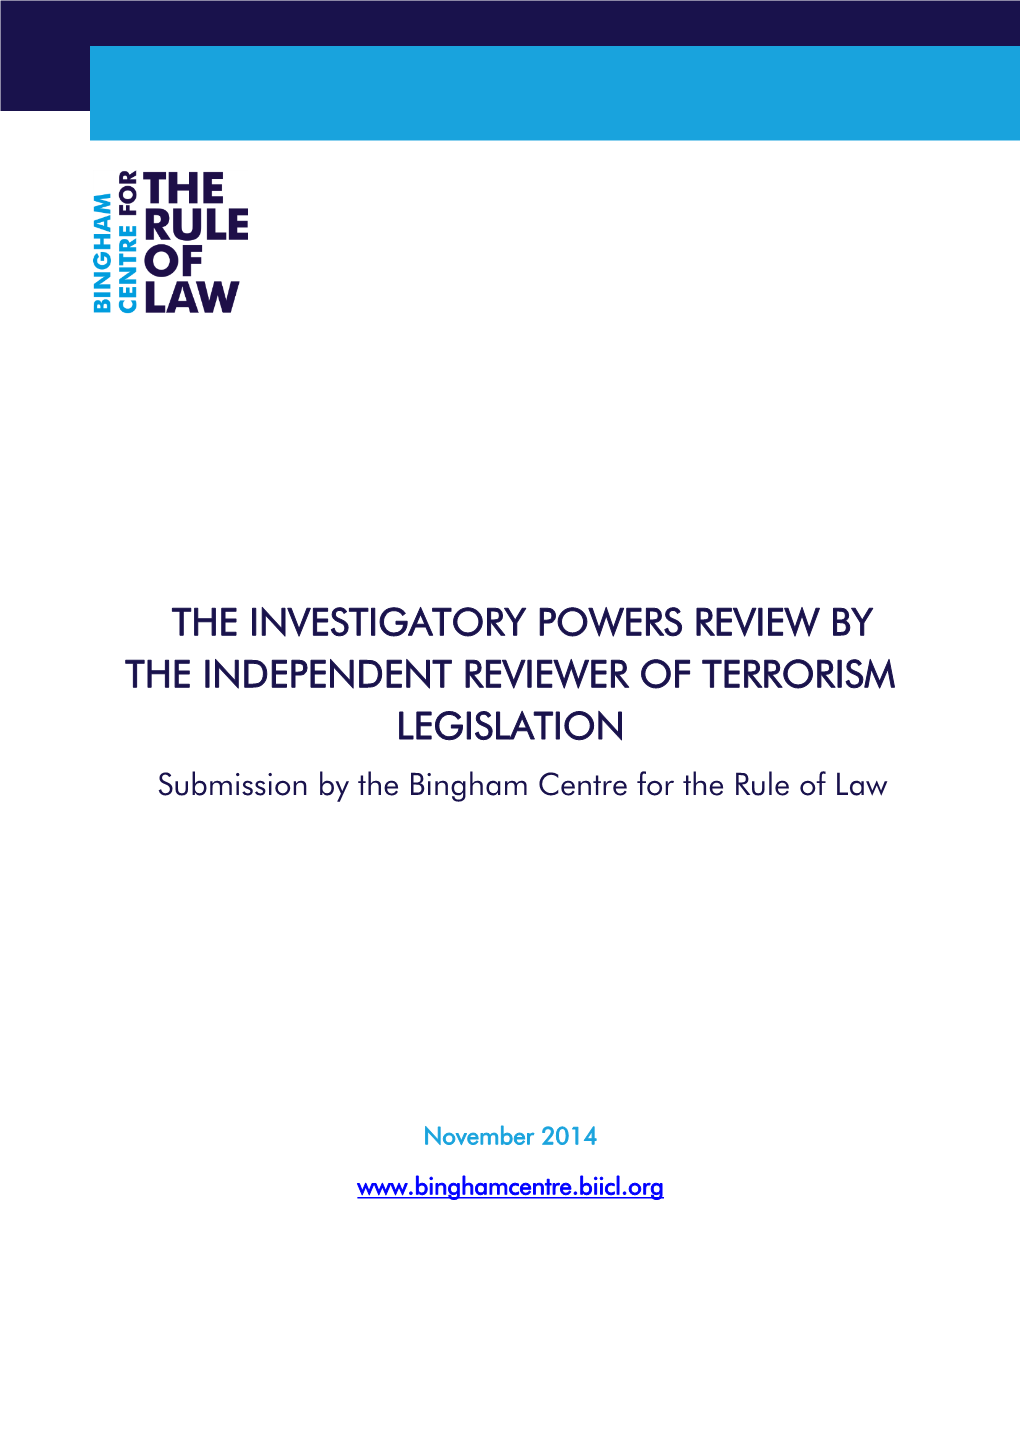 THE INVESTIGATORY POWERS REVIEW by the INDEPENDENT REVIEWER of TERRORISM LEGISLATION Submission by the Bingham Centre for the Rule of Law